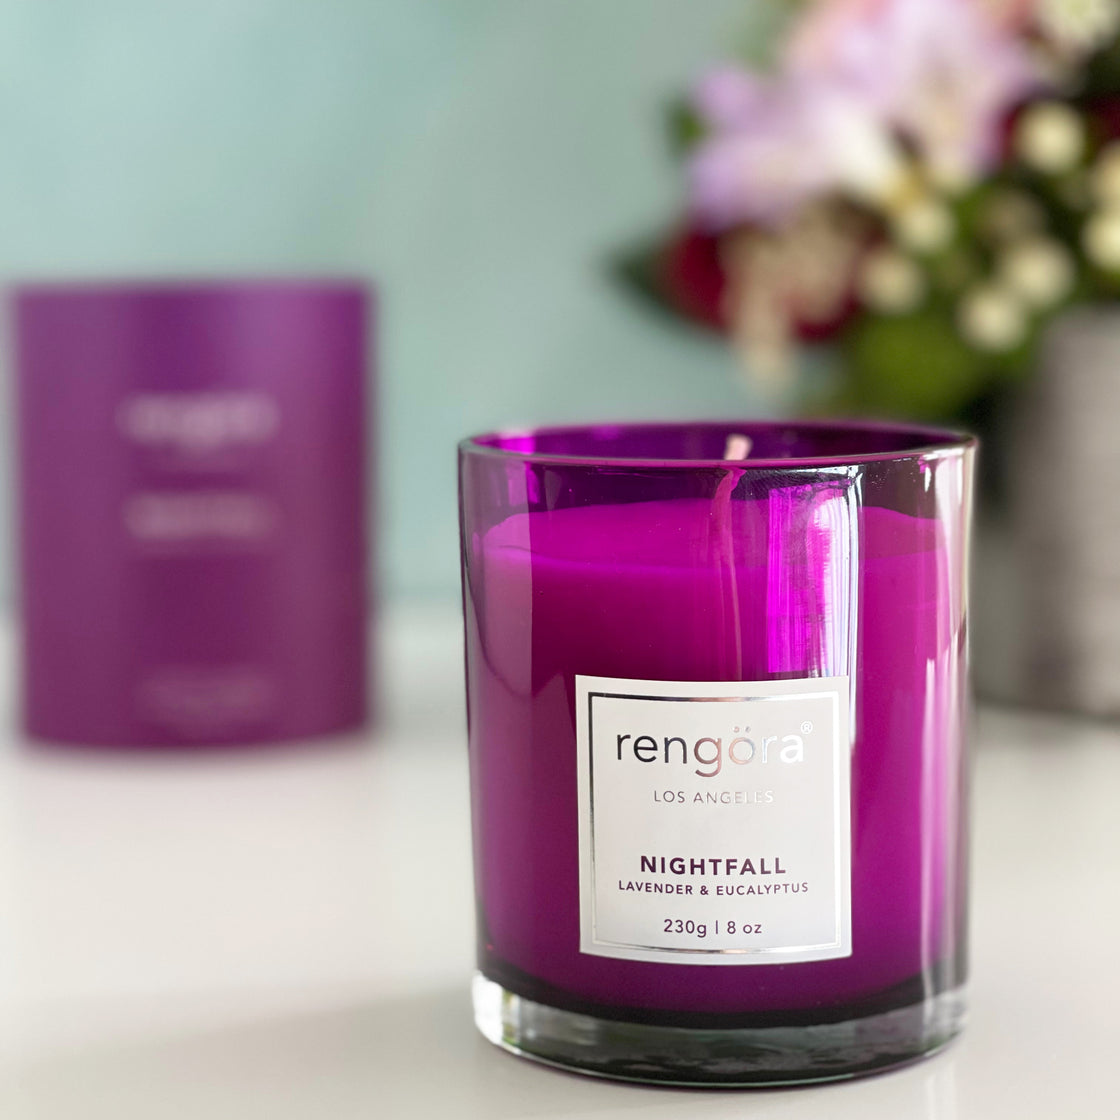 rengöra's Nightfall scented candle: lavender & eucalyptus in a beautiful purple glass container